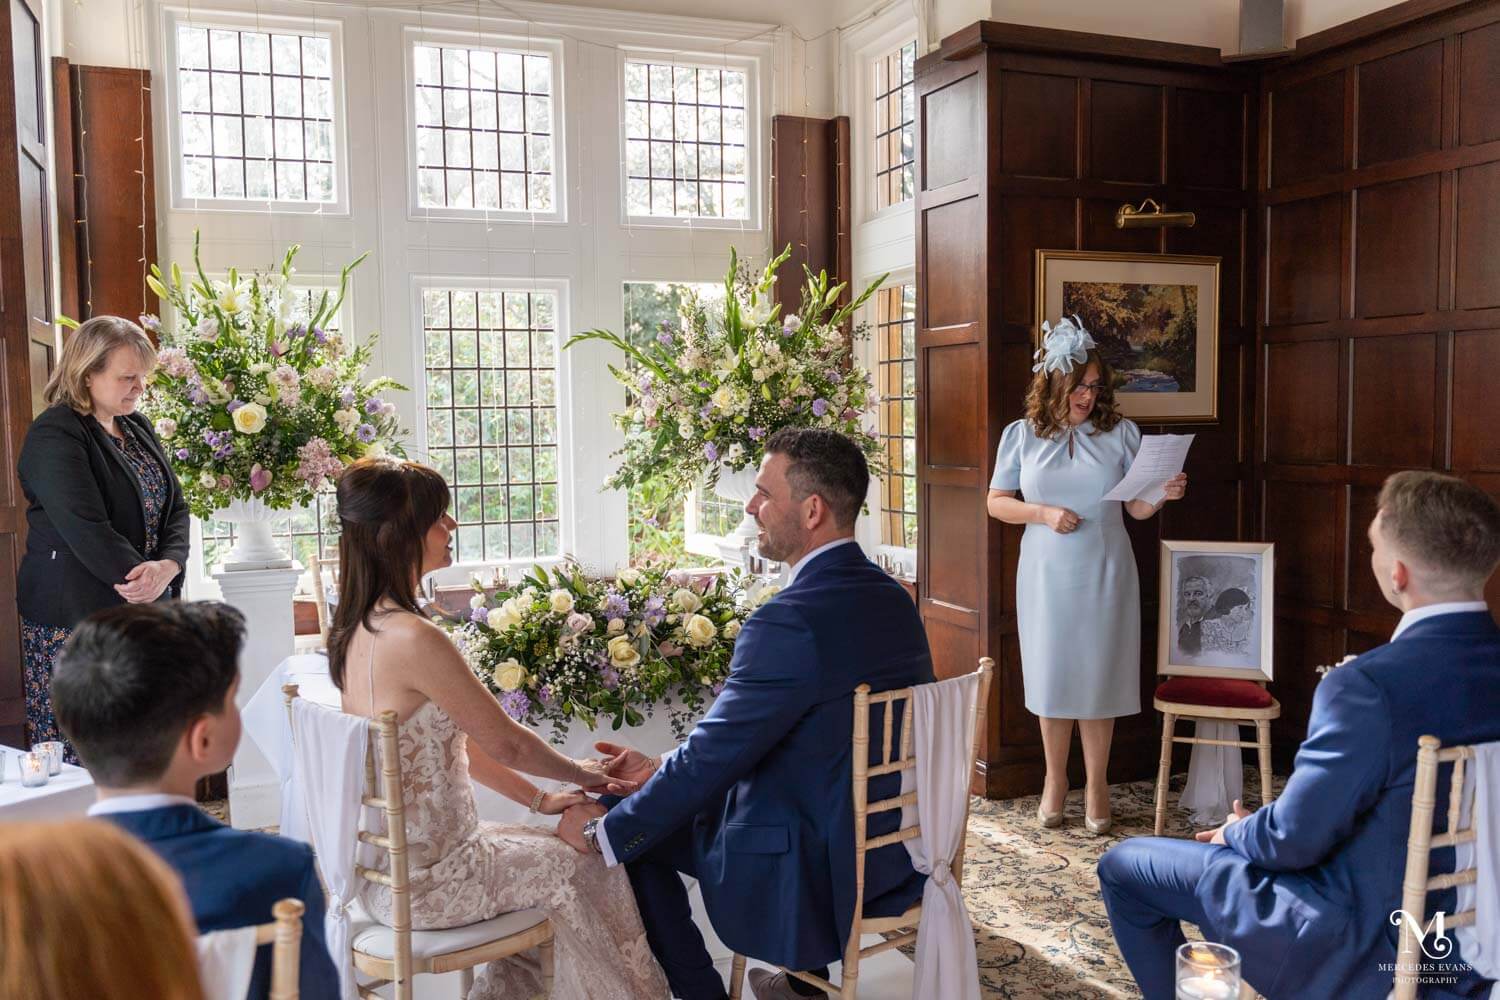 The bride and groom look at each other and hold hands as a female guest does a reading in the Oak room at Cantley House